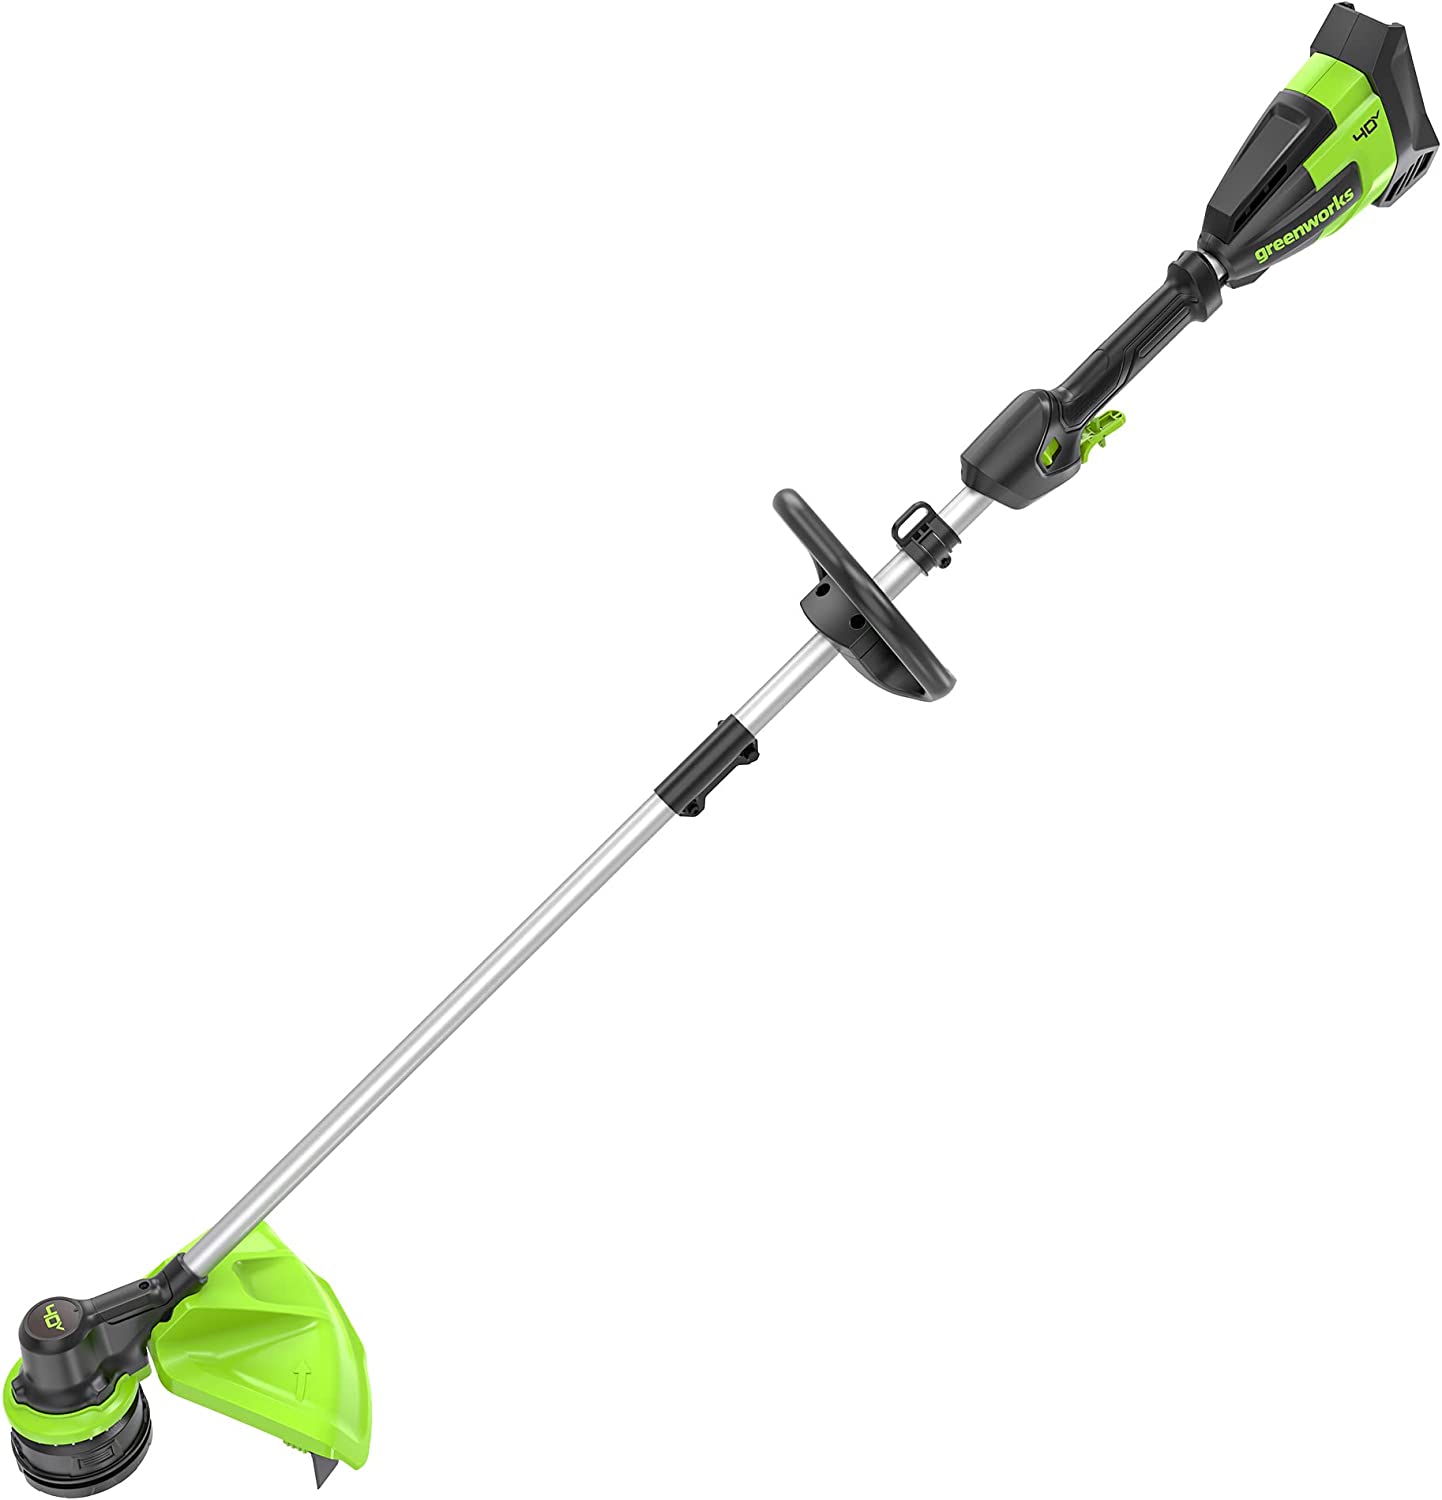 Greenworks 40V 17-inch Brushless String Trimmer, Battery and Charger Not Included